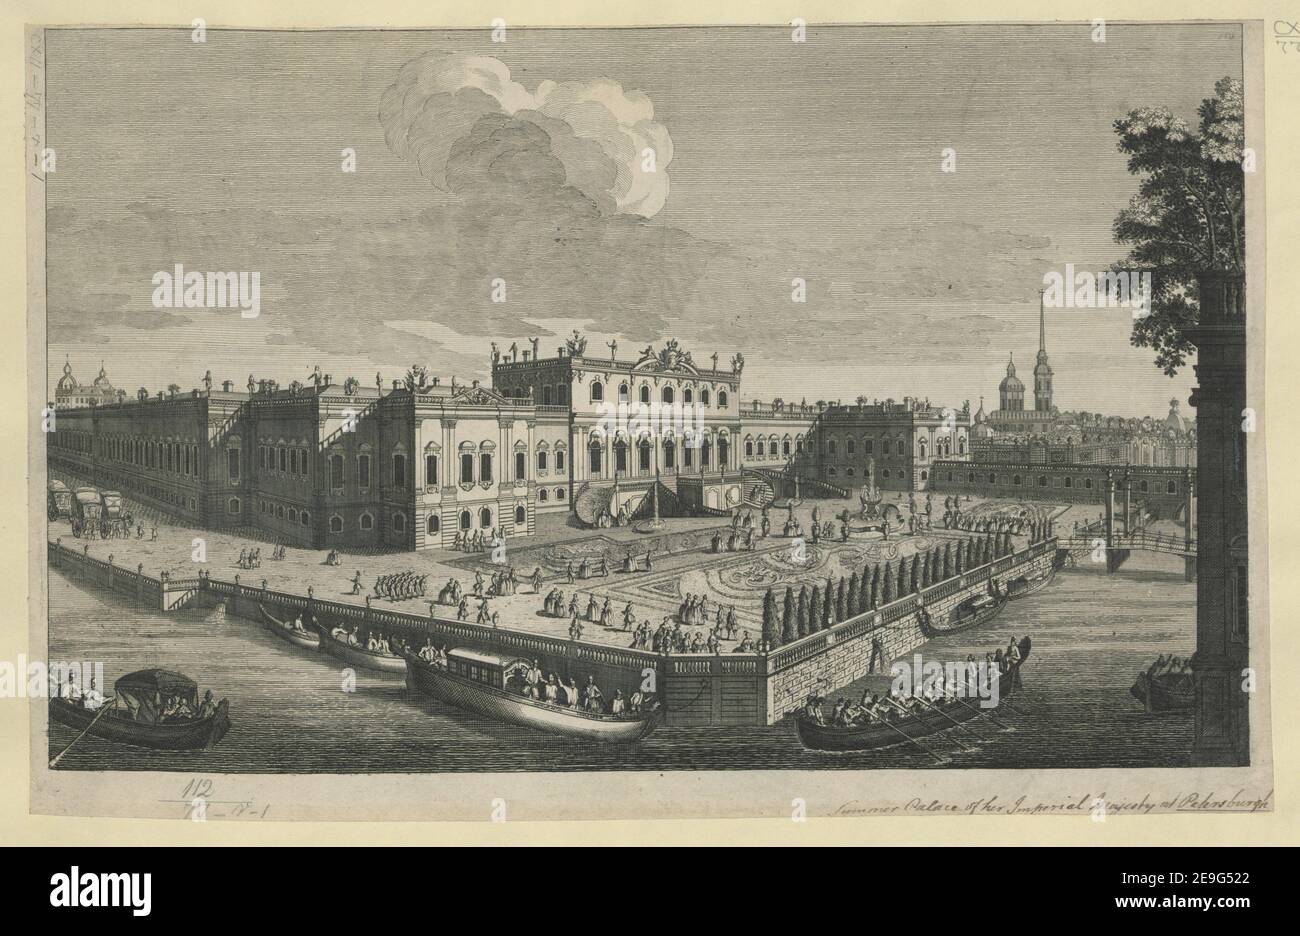 Summer Palace of her Imperial Majesty at Petersburgh. . Visual Material information:  Title: [Summer Palace of her Imperial Majesty at Petersburgh.]. 112.77.r.1. Place of publication: [St. Petersburg?] Publisher: [unidentified publisher]., Date of publication: [1756 c.]  Item type: 1 print Medium: etching and engraving Dimensions: sheet 26.8 x 42.0 cm [trimmed within platemark]  Former owner: George III, King of Great Britain, 1738-1820 Stock Photo